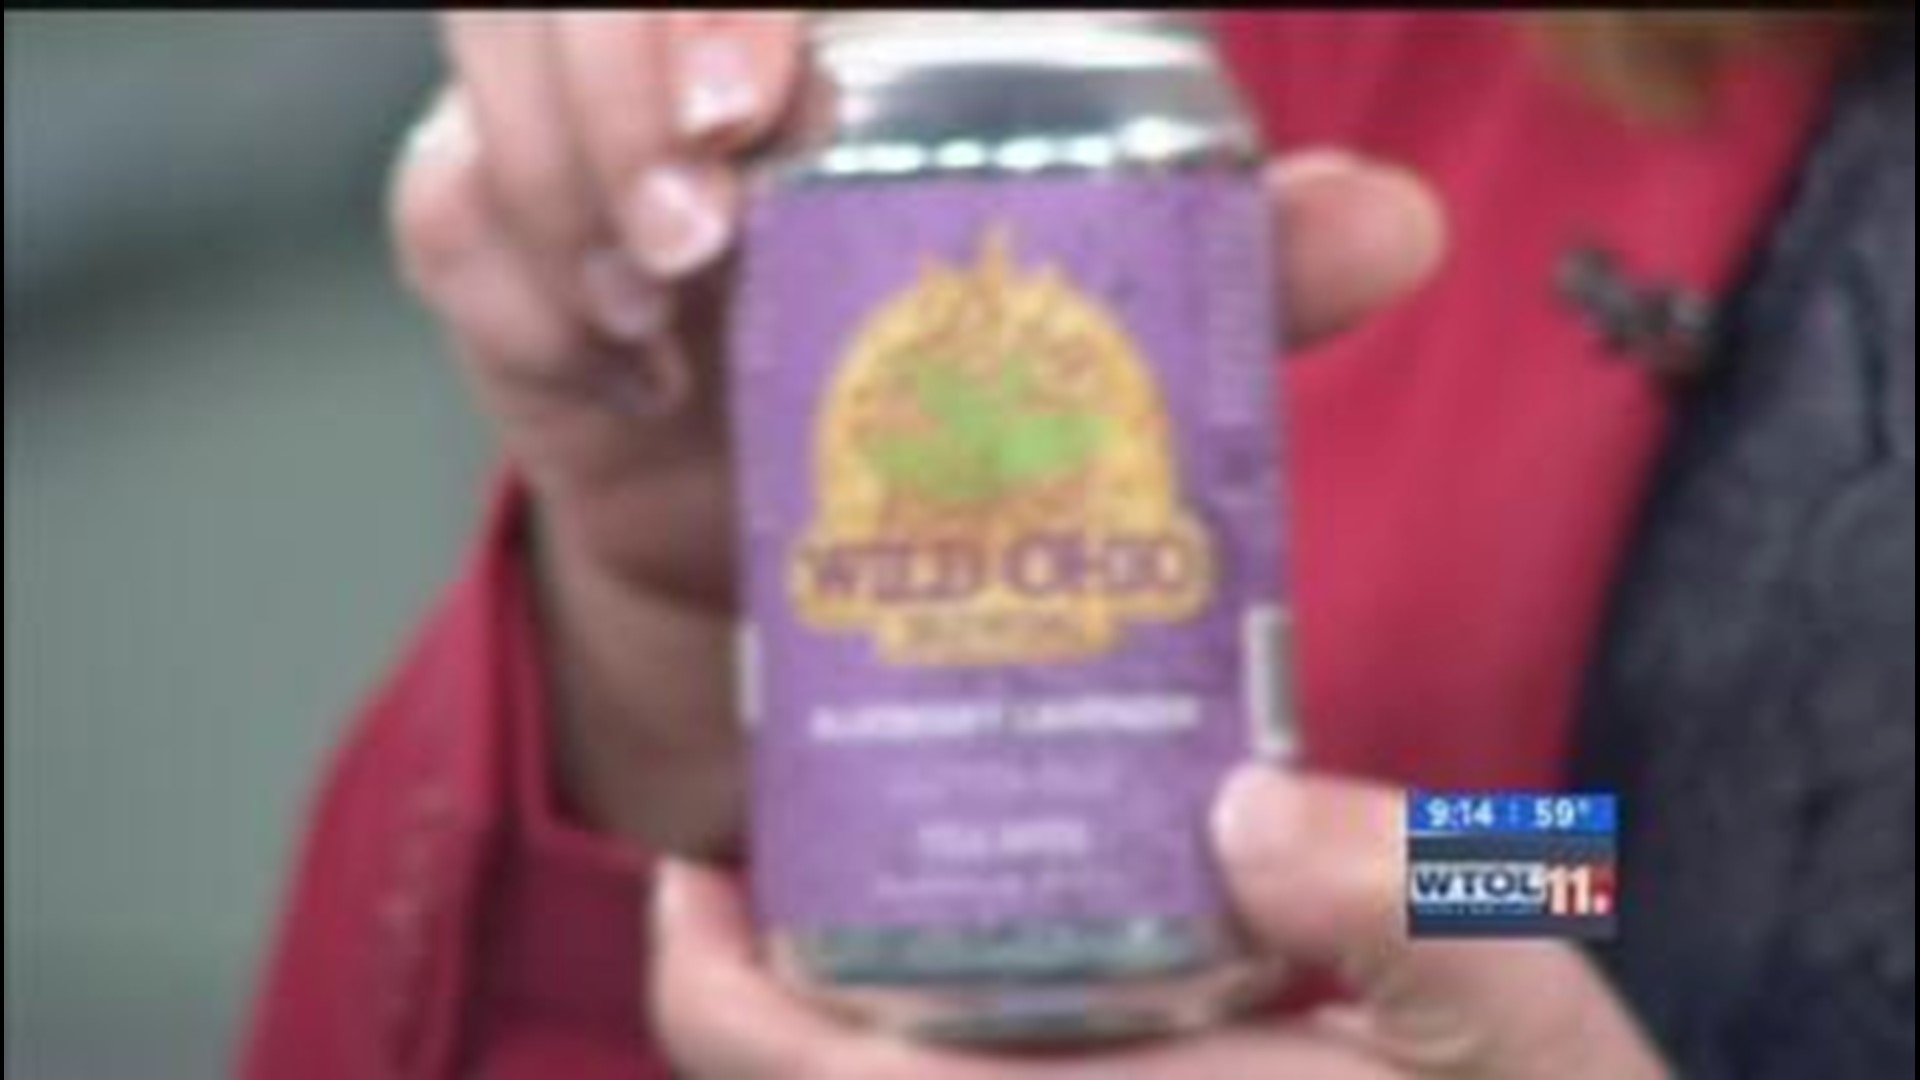 Enjoy beer at the Mud Hens Craft Beer Tasting this weekend on WTOL 11 Your Day